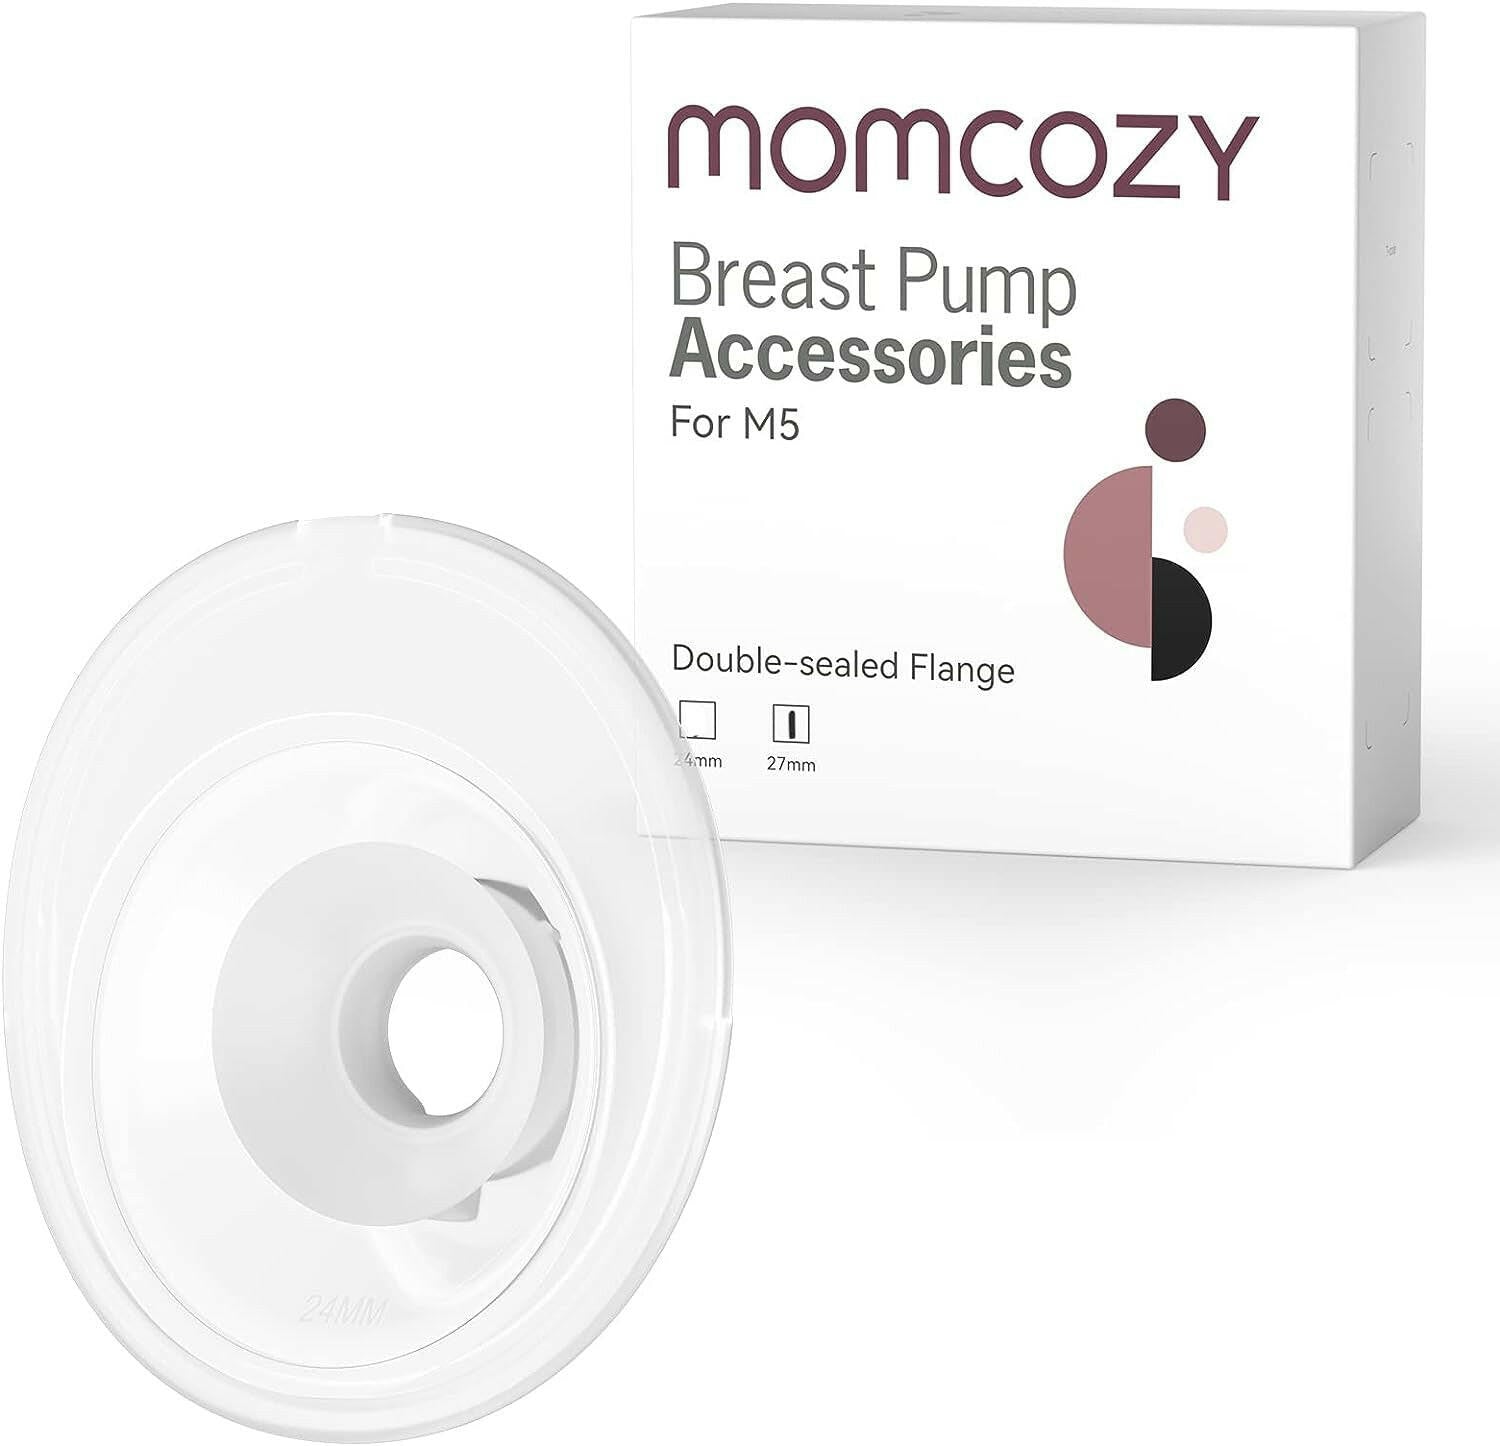 Momcozy Double-Sealed Flange Compatible with Momcozy M5